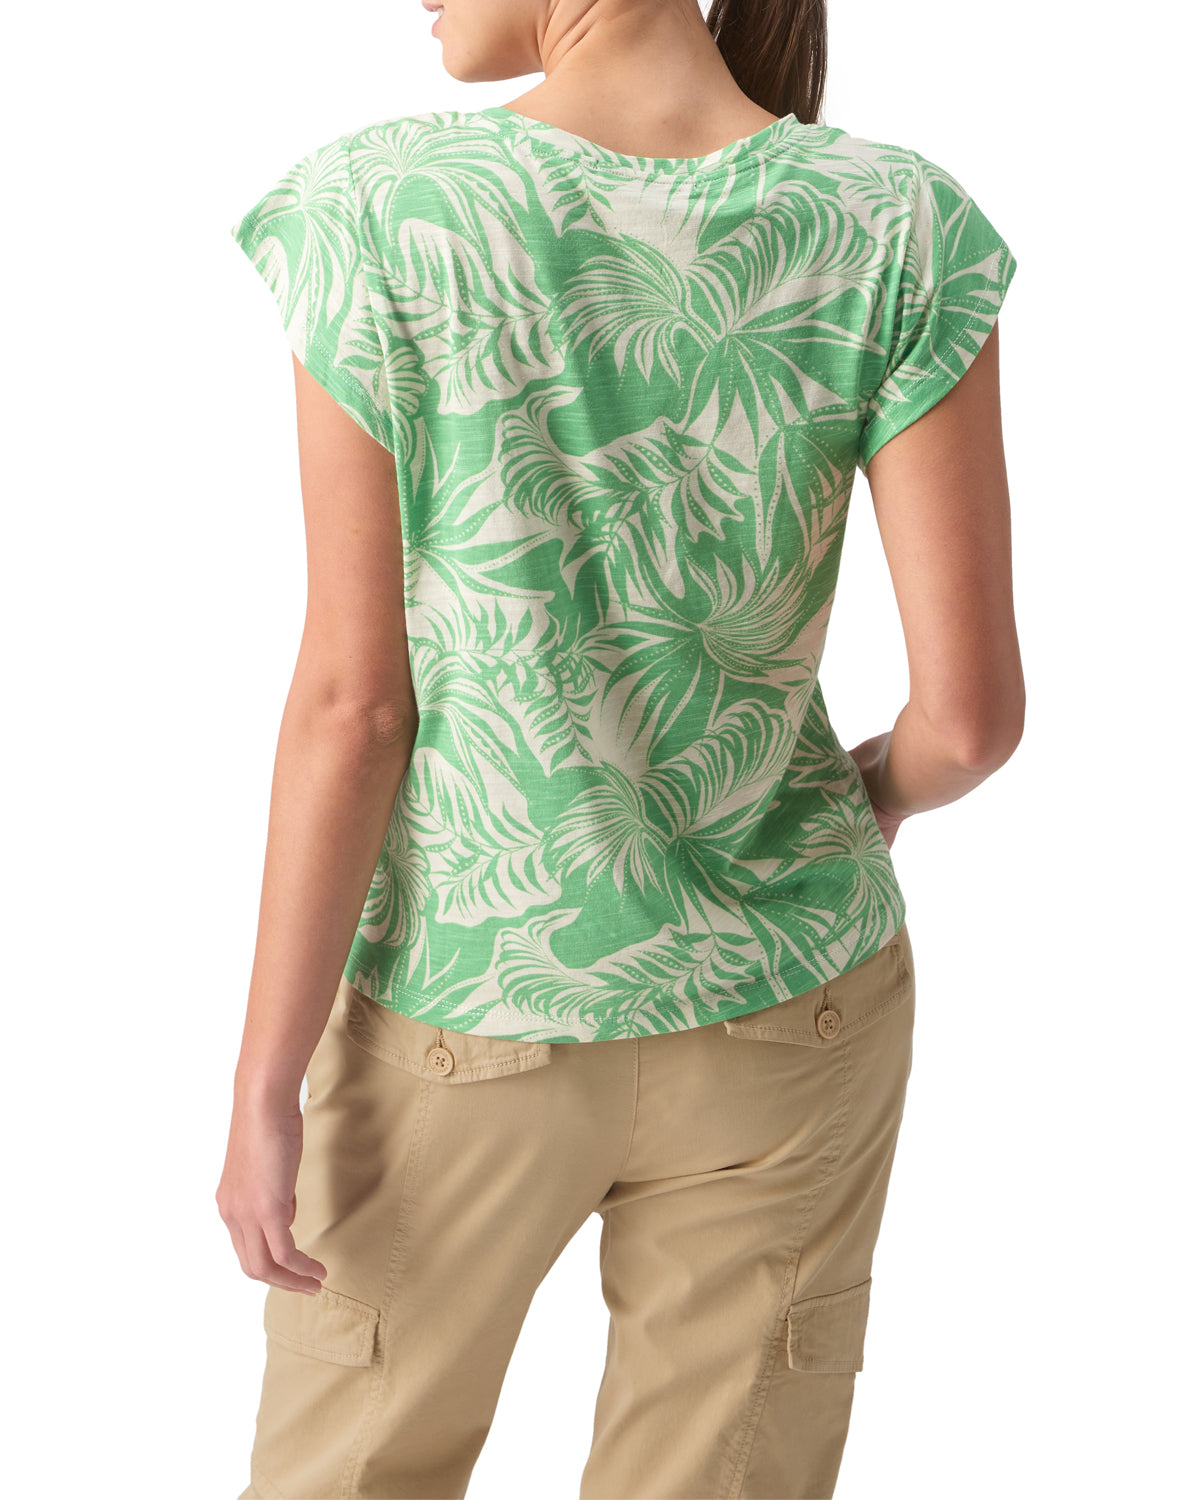 West Side Tee by Sanctuary in Cool Palm